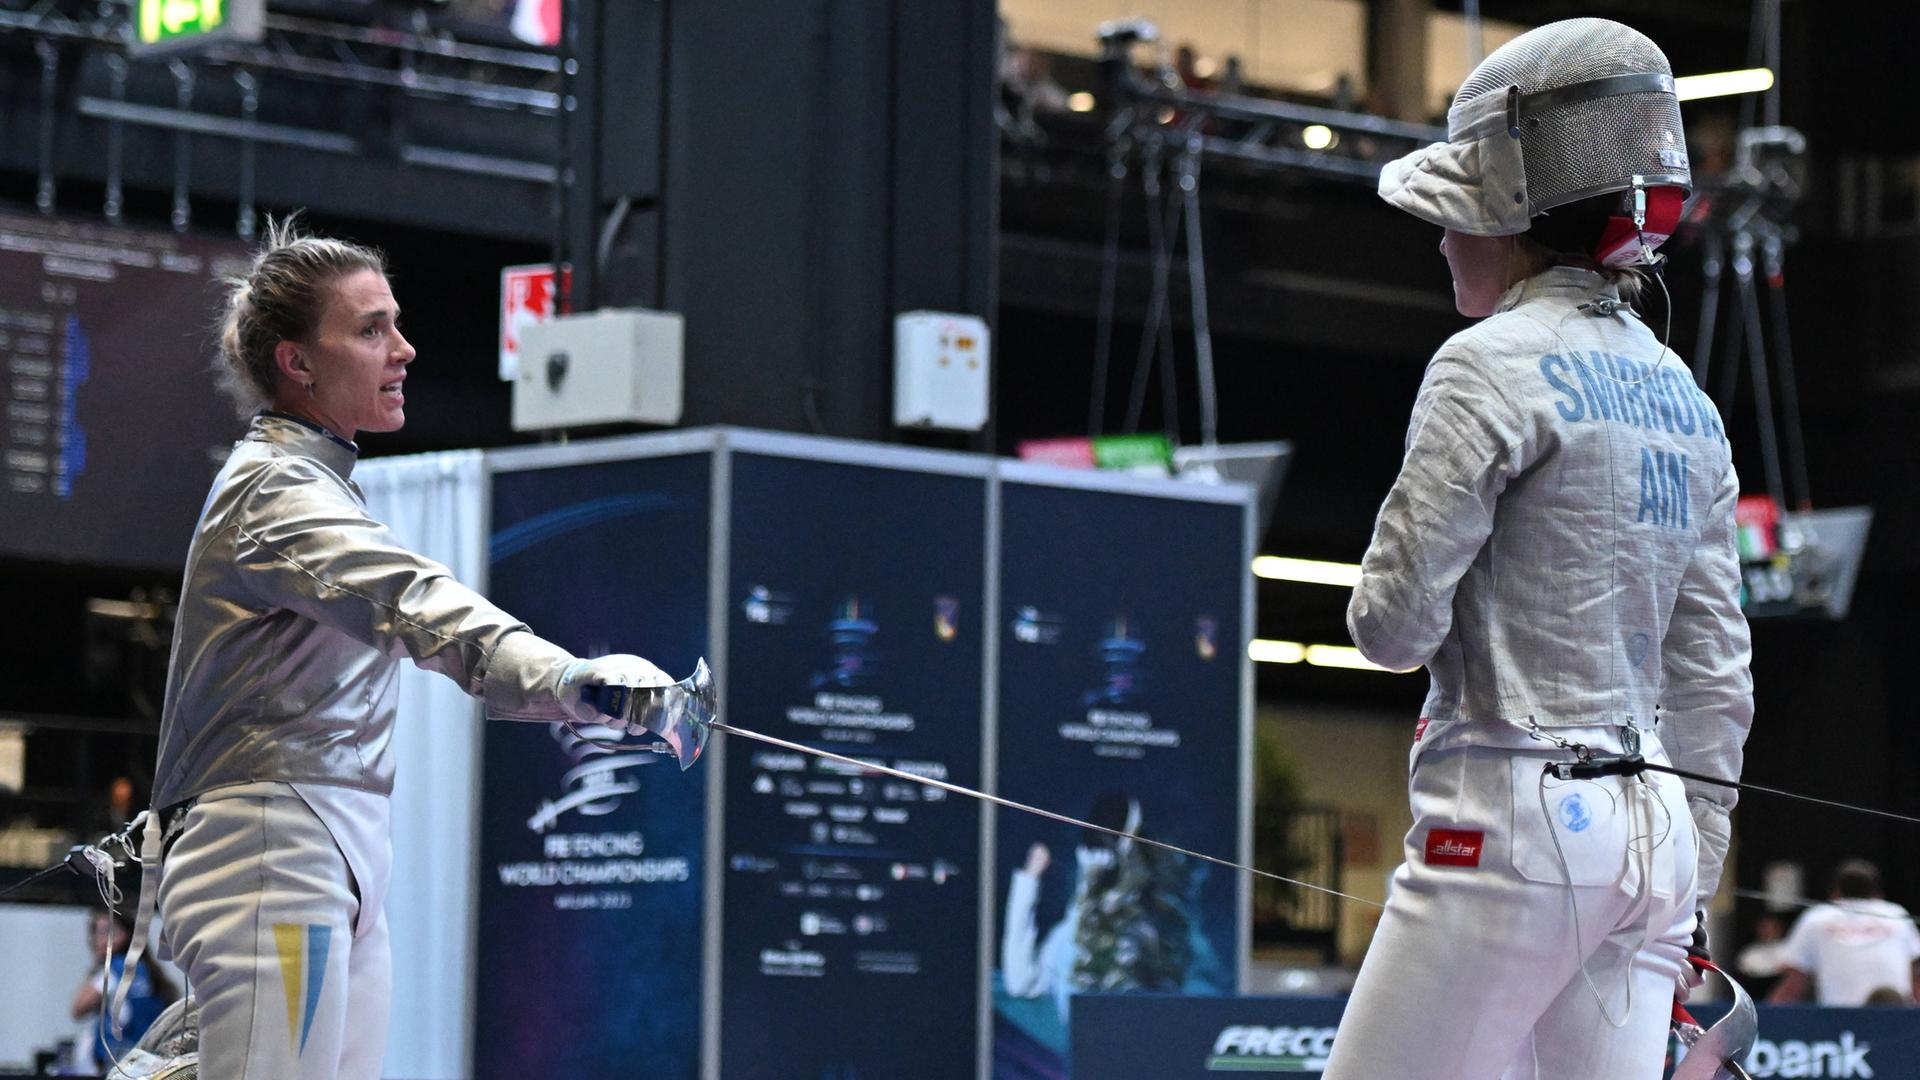 Olga Kharlan of Ukraine L refuses to greet with Anna Smirnova of Russia, registered as an Individual Neutral Athlete AIN, during the 2023 FIE Fencing World Championship, WM, Weltmeisterschaft Women s Sabre 1st round match in Milano, Italy on July 27, 2023. Noxthirdxpartyxsales PUBLICATIONxNOTxINxJPN 225072124